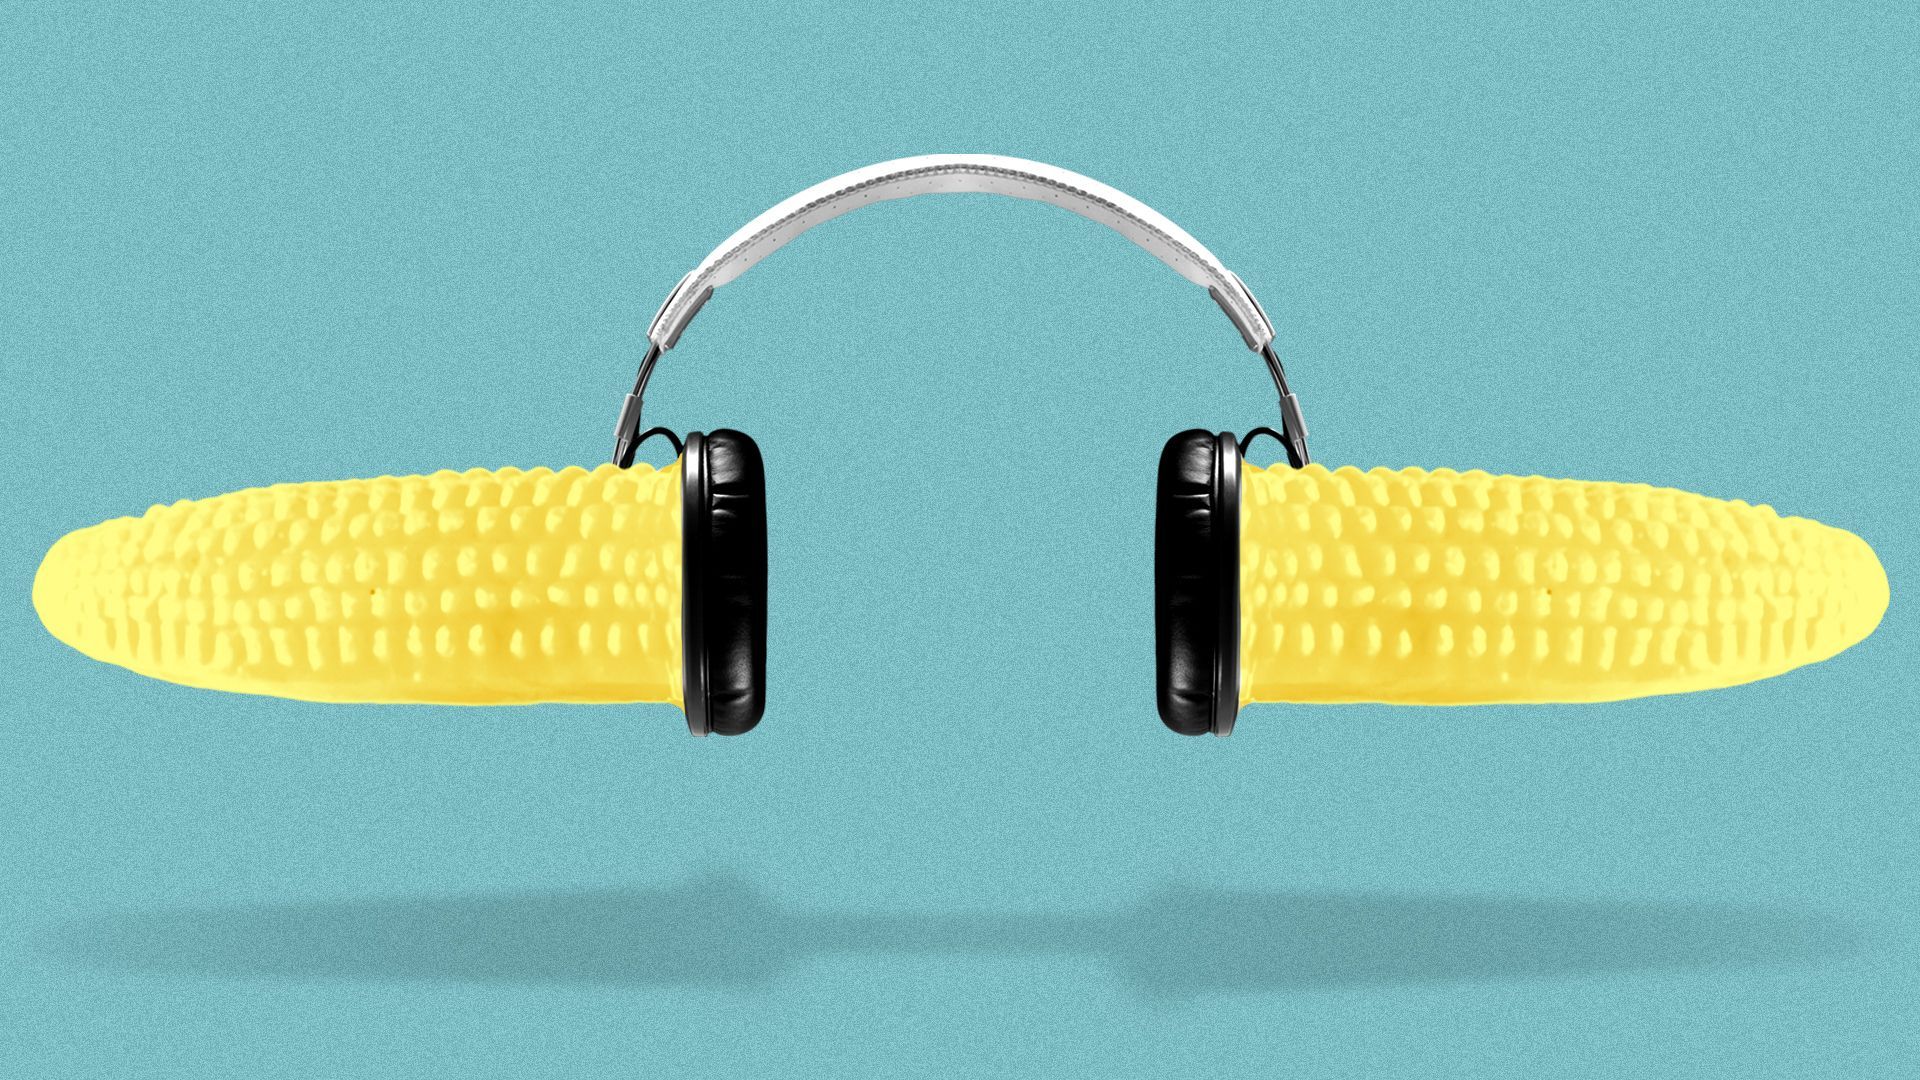 Illustration of a pair of headphones with plastic corn cob holders sticking out of them.